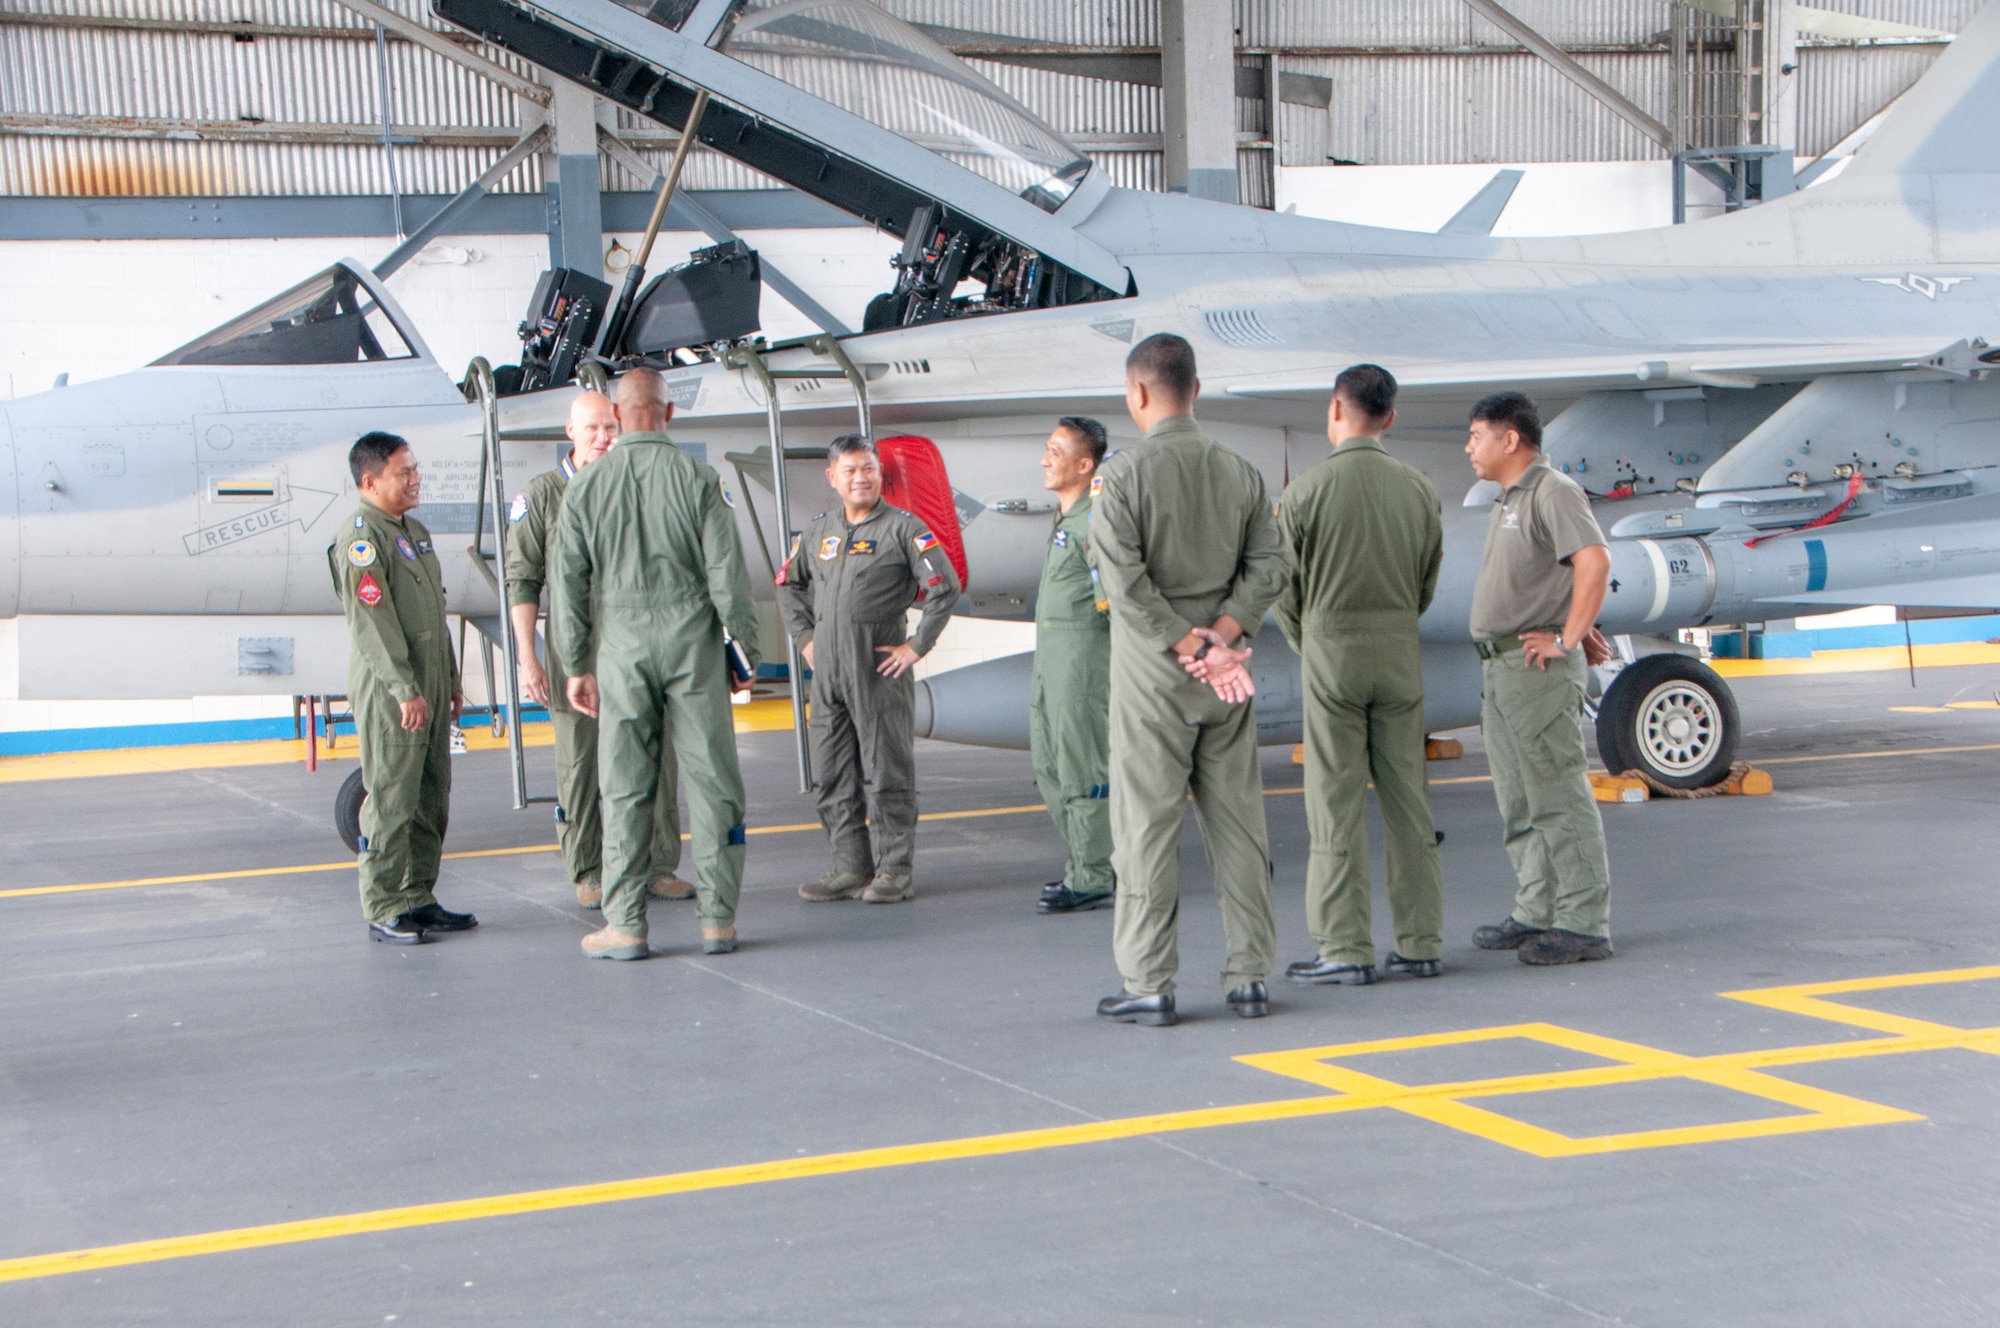 Philippine Air Force officials give a tour of the PAF’s FA-50 fighter aircraft and facilities